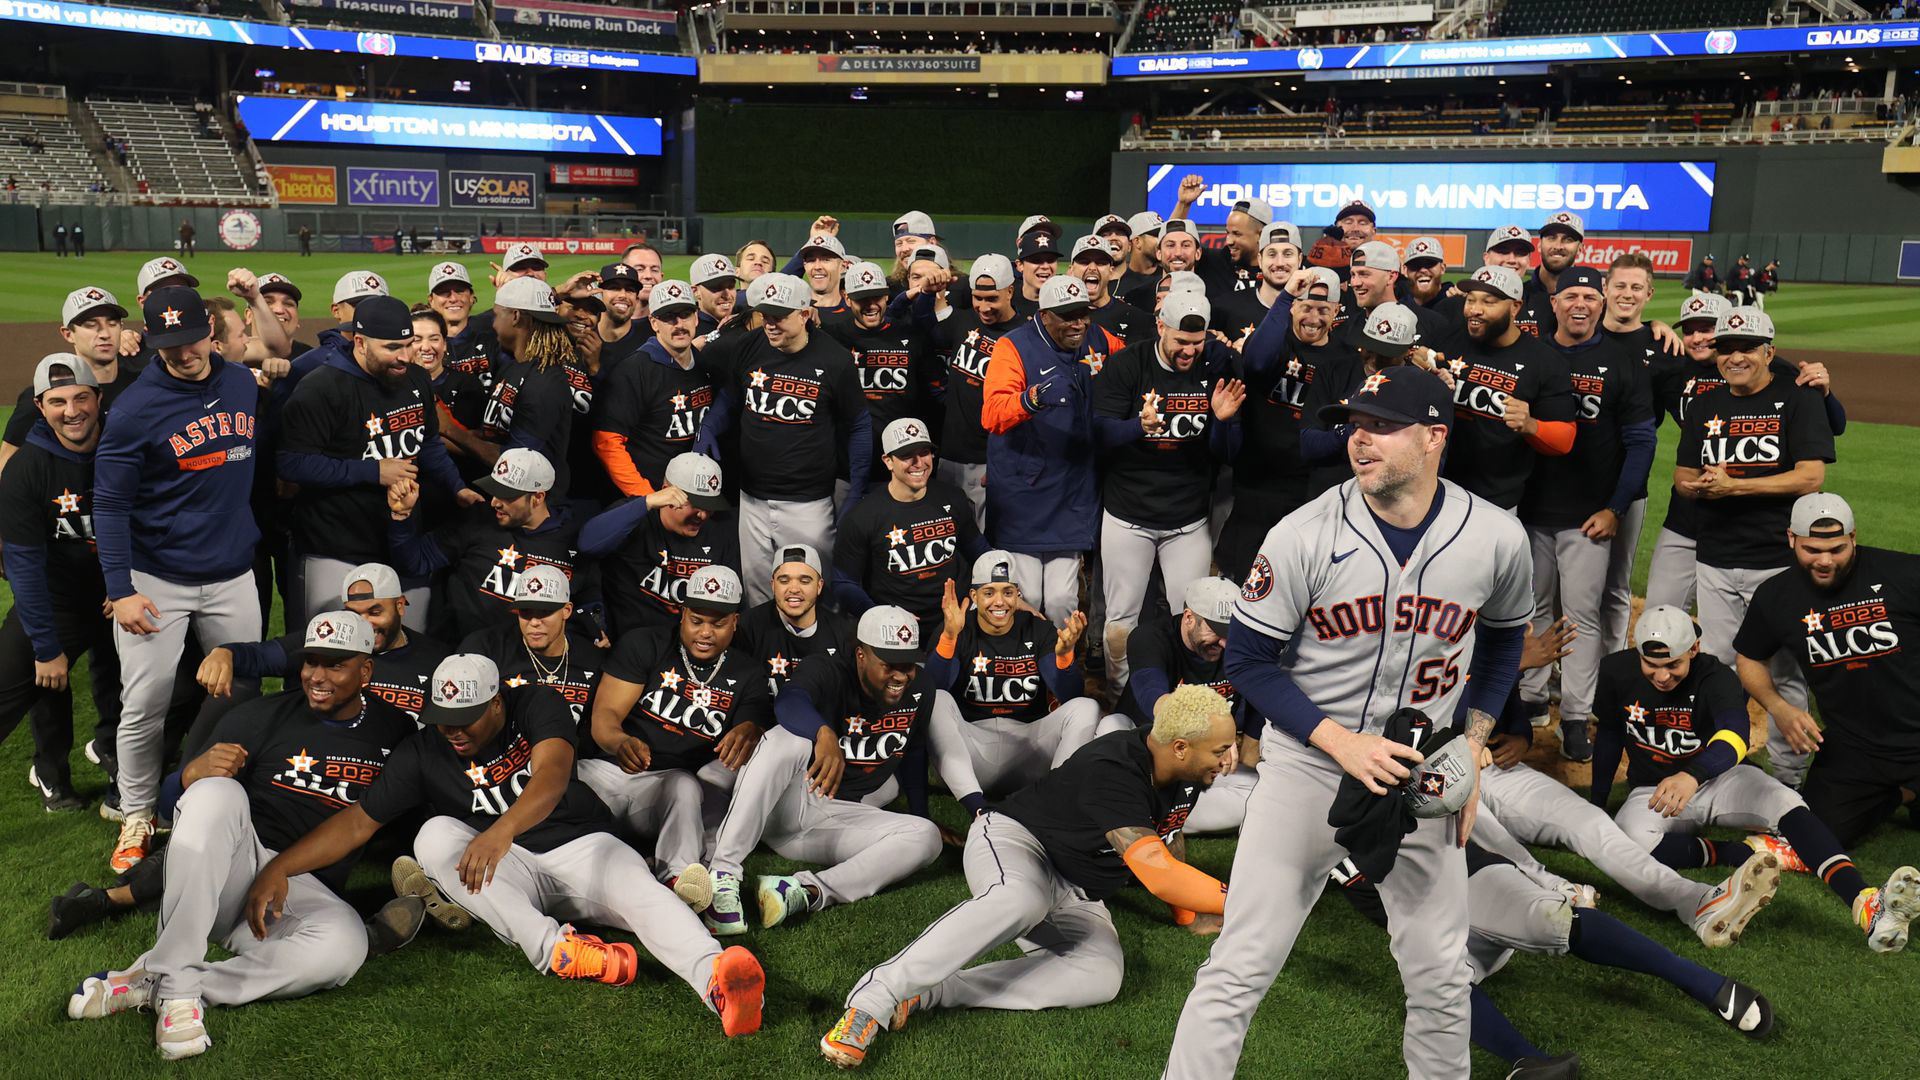 Who Wins the ALCS? By How Many Games and How Many Runs?